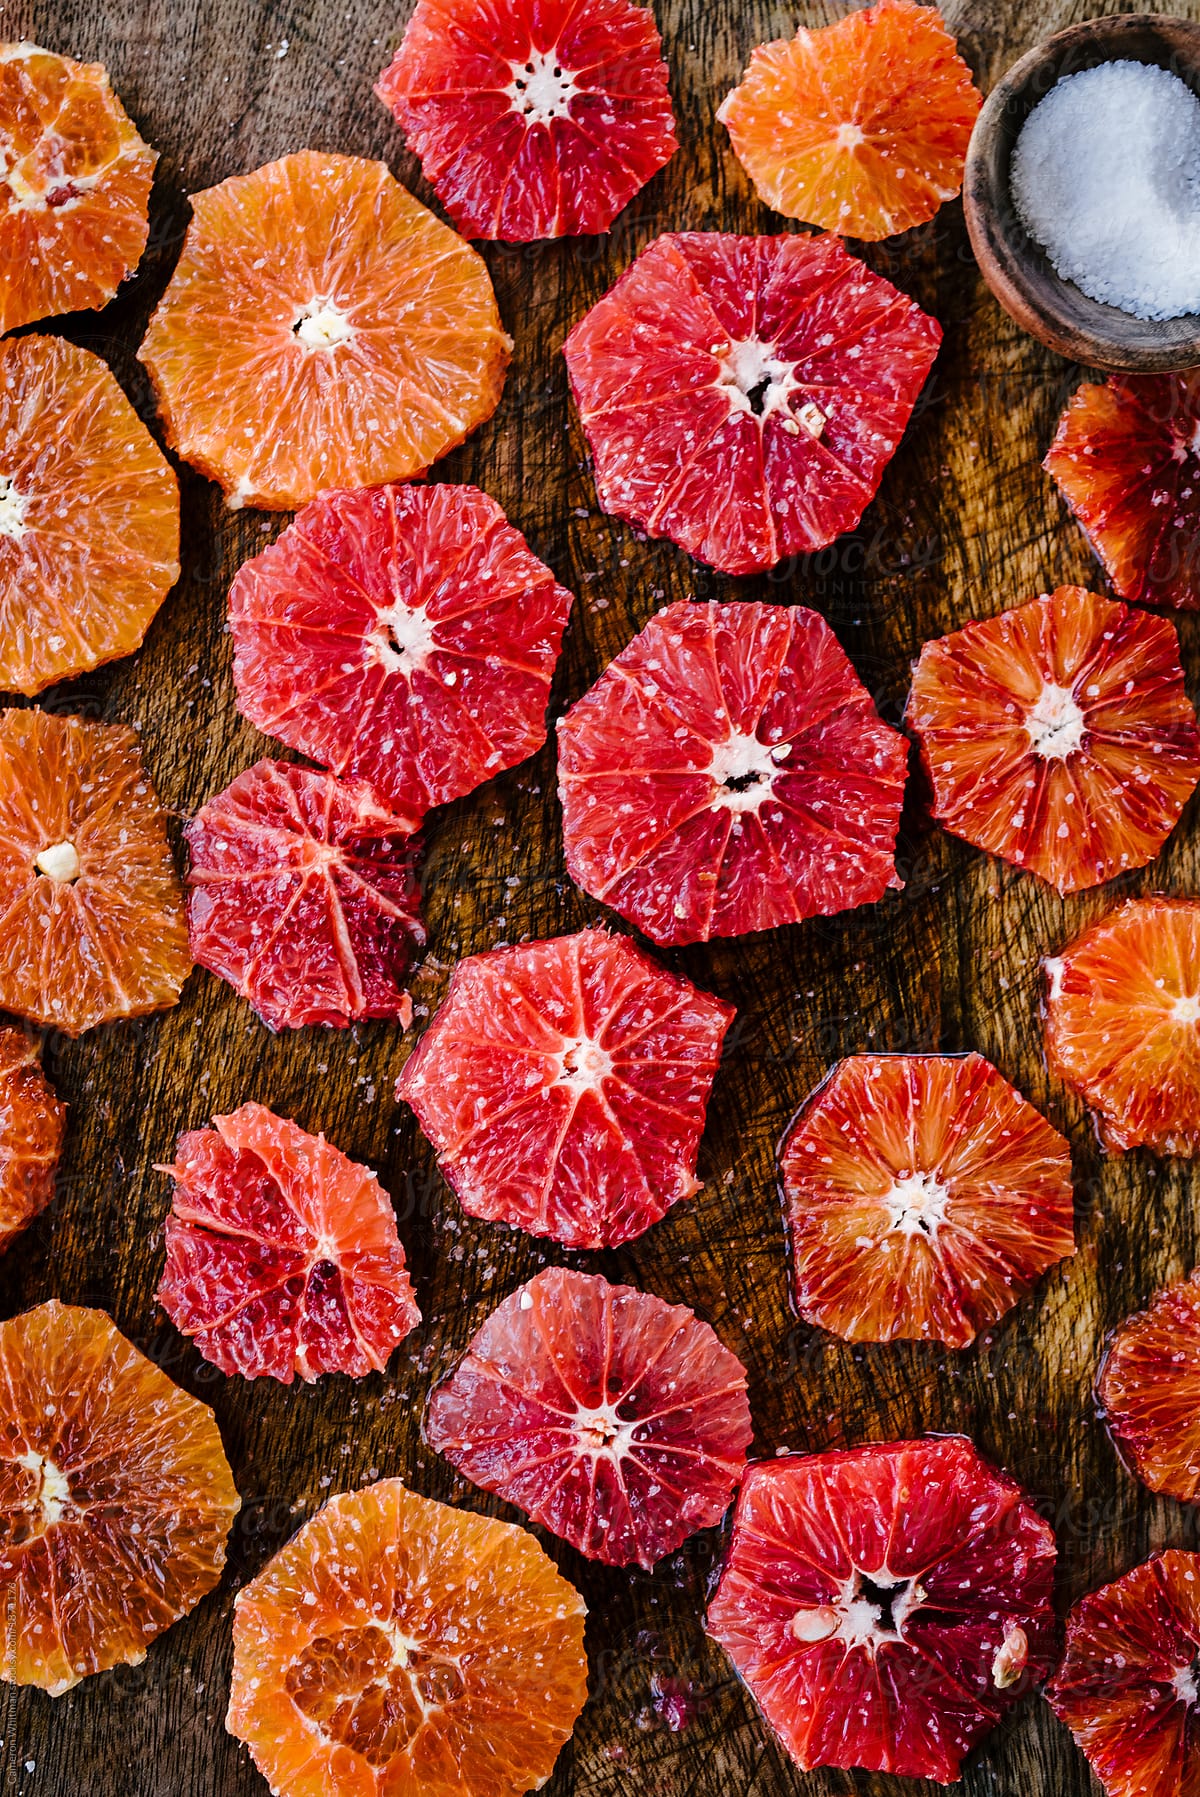 Sliced and Salted Citrus Fruits